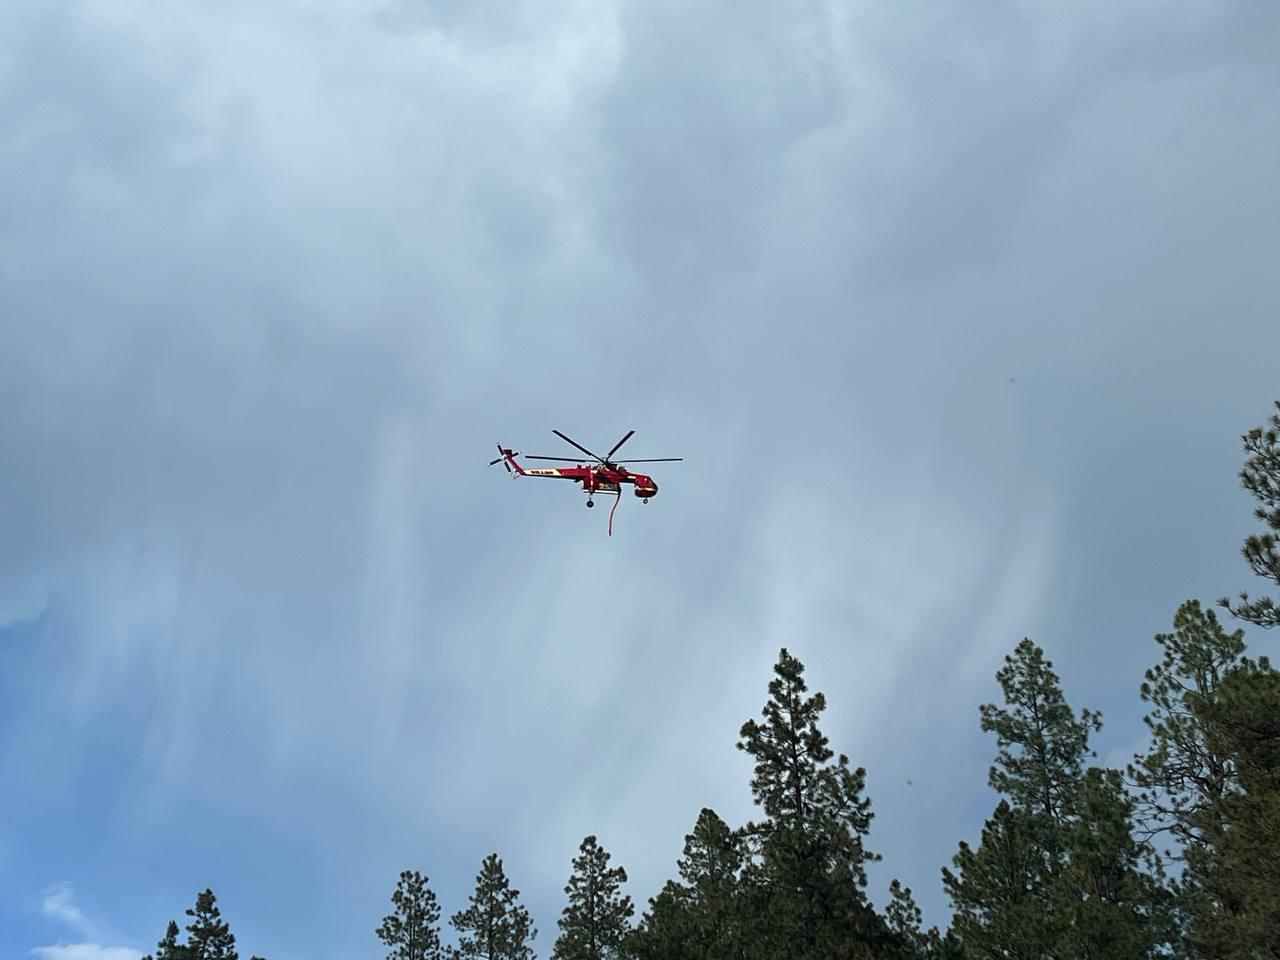 A type one helicopter, known as a sky crane, flies above the treetops against a cloudy sky.